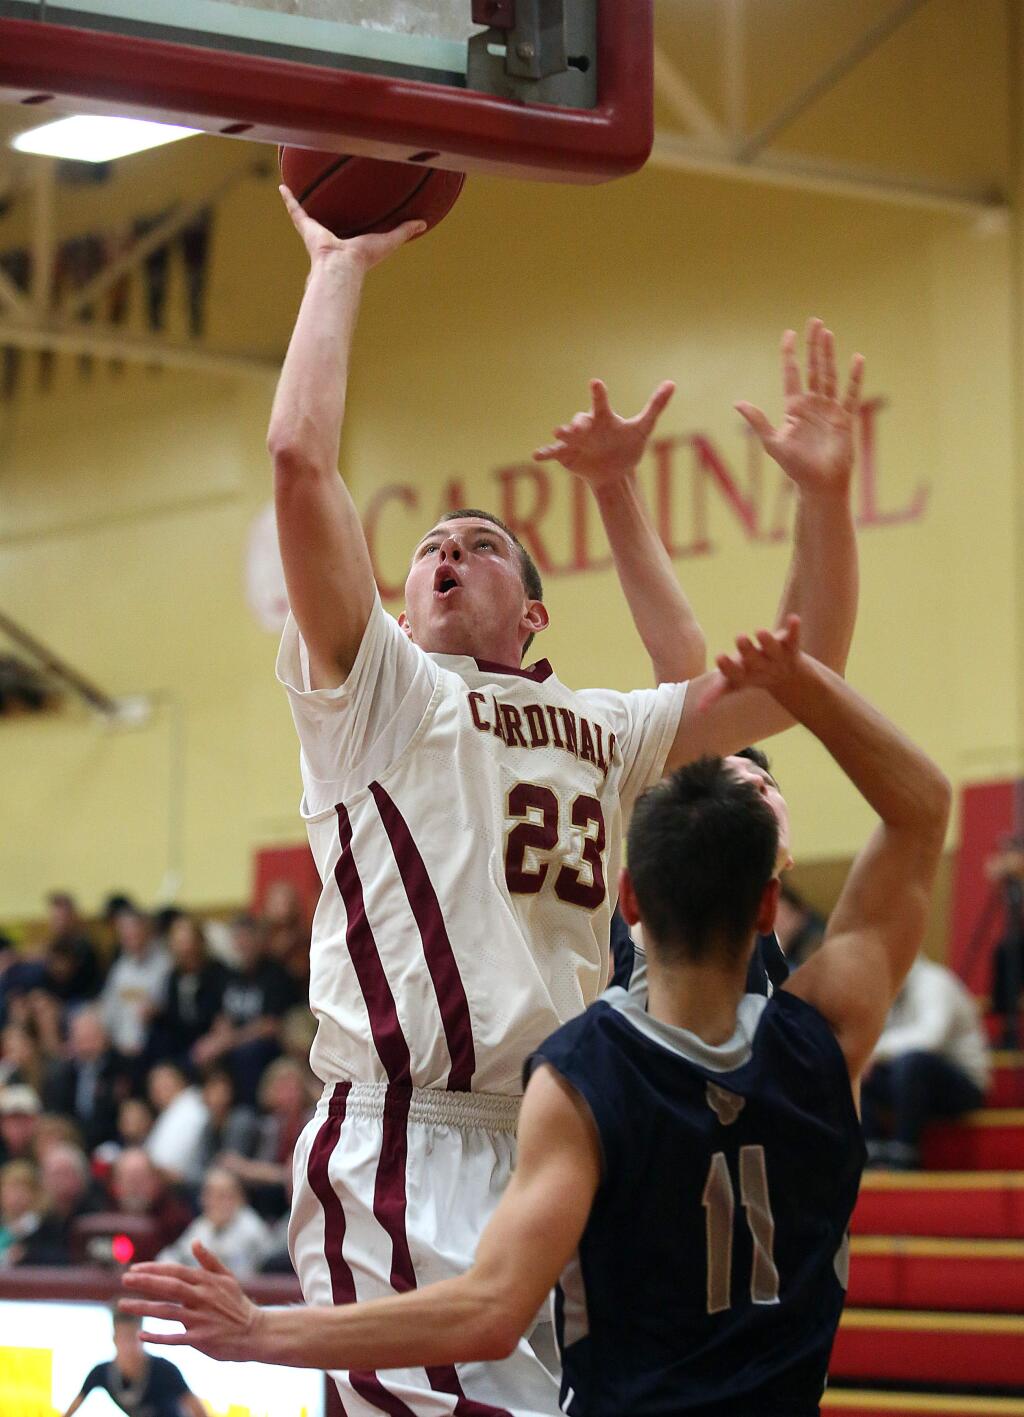 Cardinal Newman's James Ryan goes up to the basket as Marin Catholic's Sepehr Agnese defends during the game held at Cardinal Newman High School, Tuesday, December 2, 2014. (Crista Jeremiason / The Press Democrat)